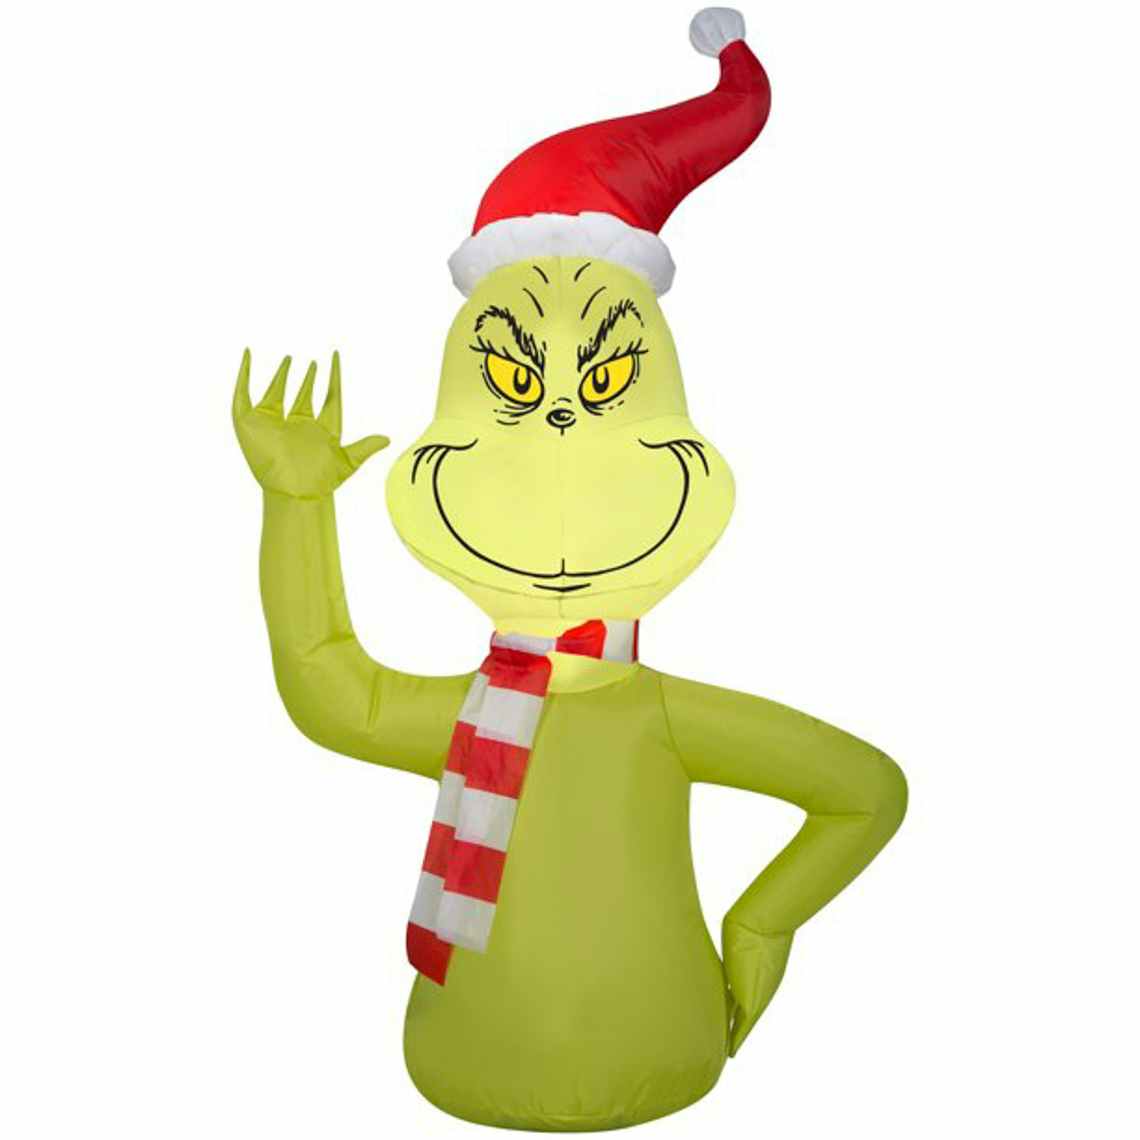 stock photo of the grinch car buddy on white background